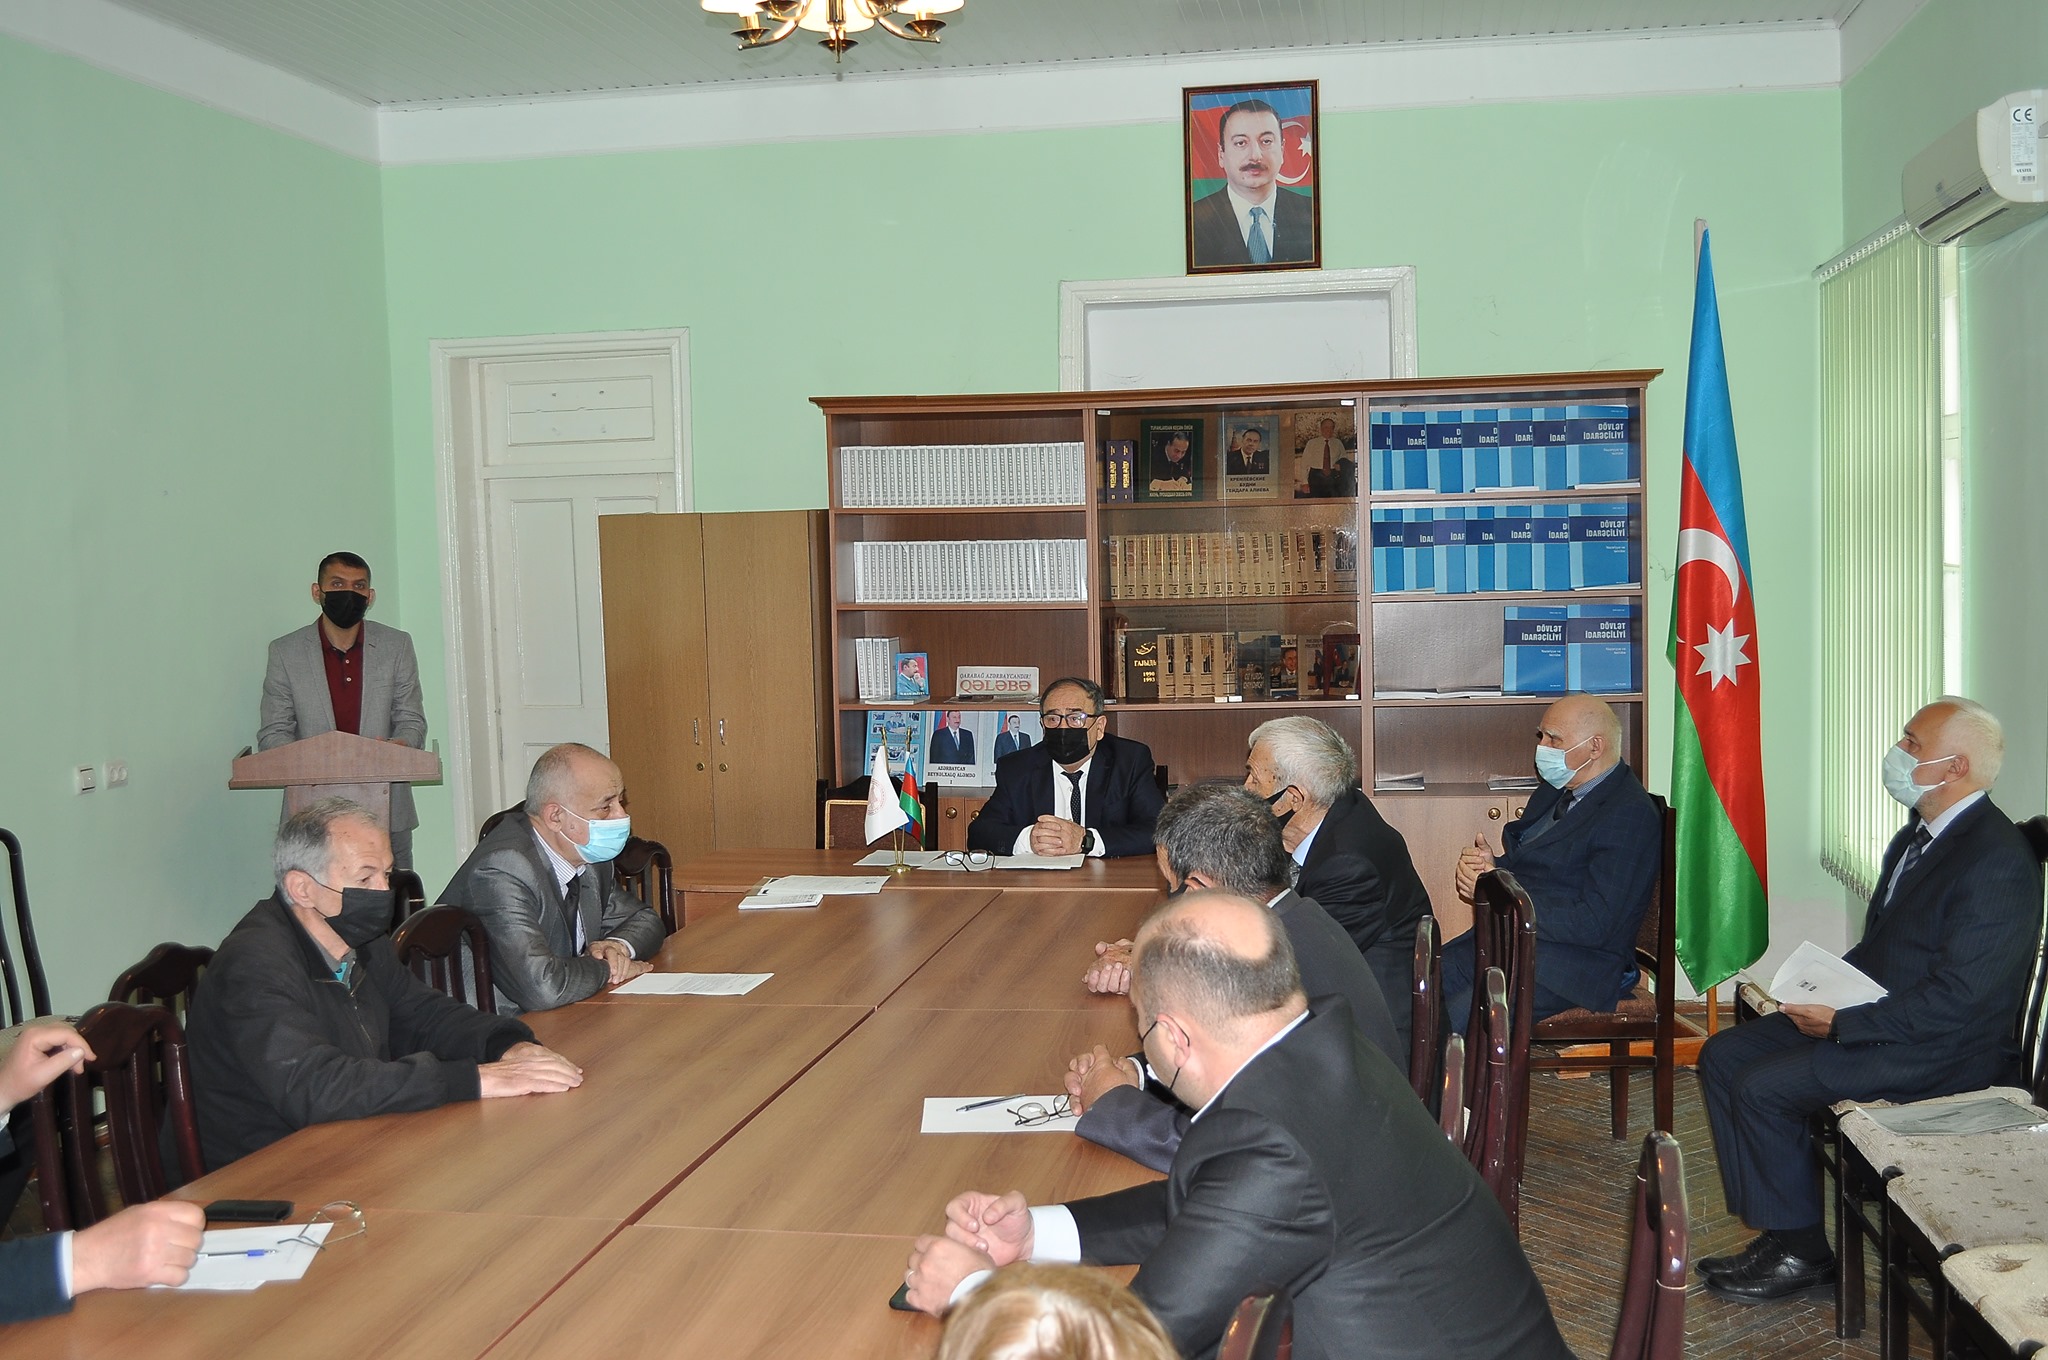 On April 28, 2021, the next meeting of the Scientific Council of Sheki REM of ANAS was held